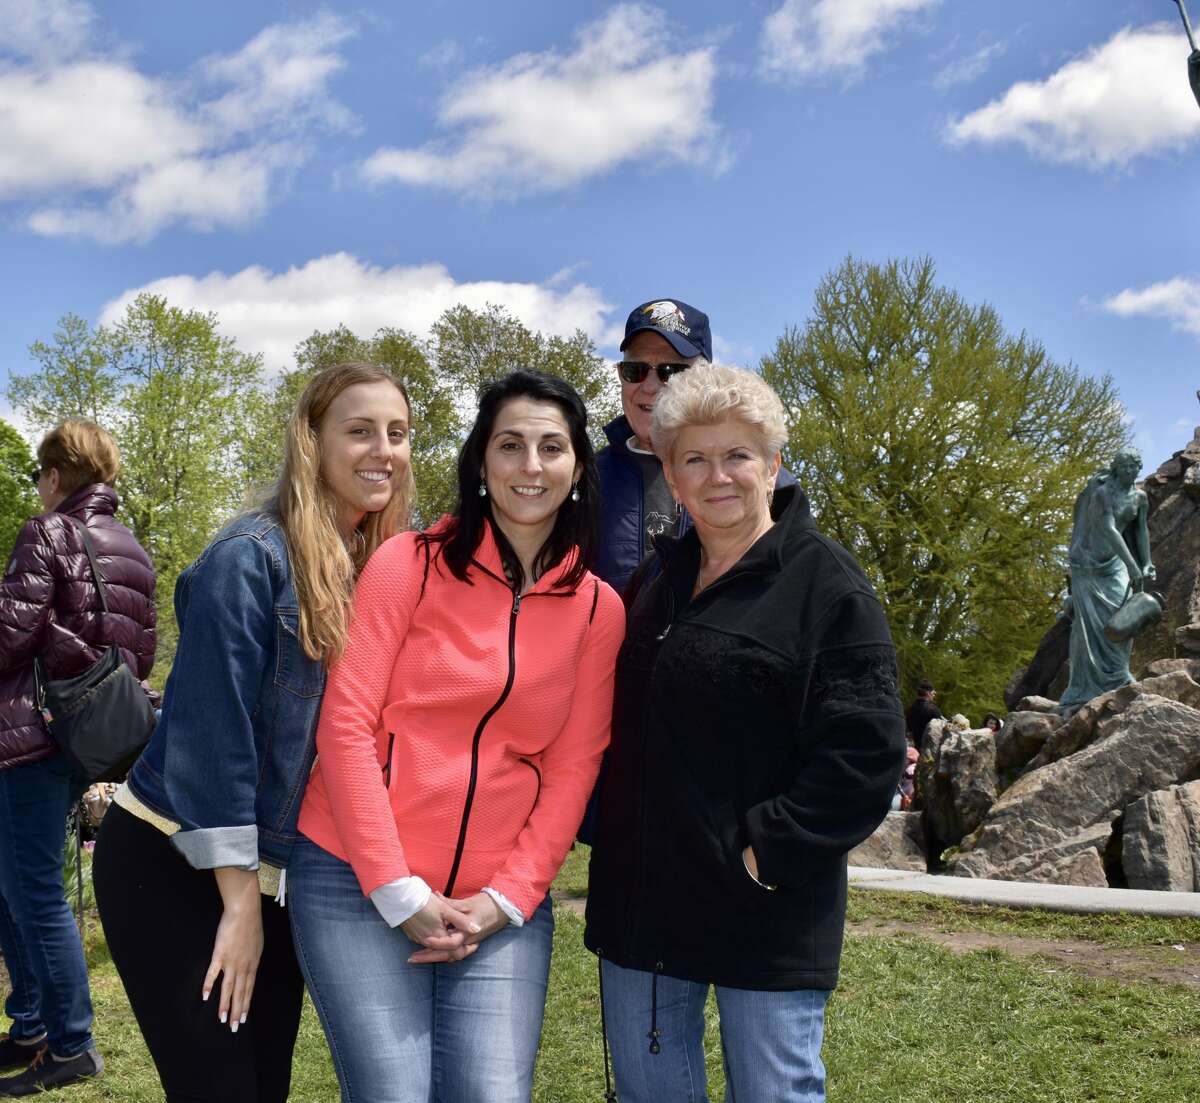 Were you Seen at the Albany Tulip Festival in Washington Park on May 11, 2019?